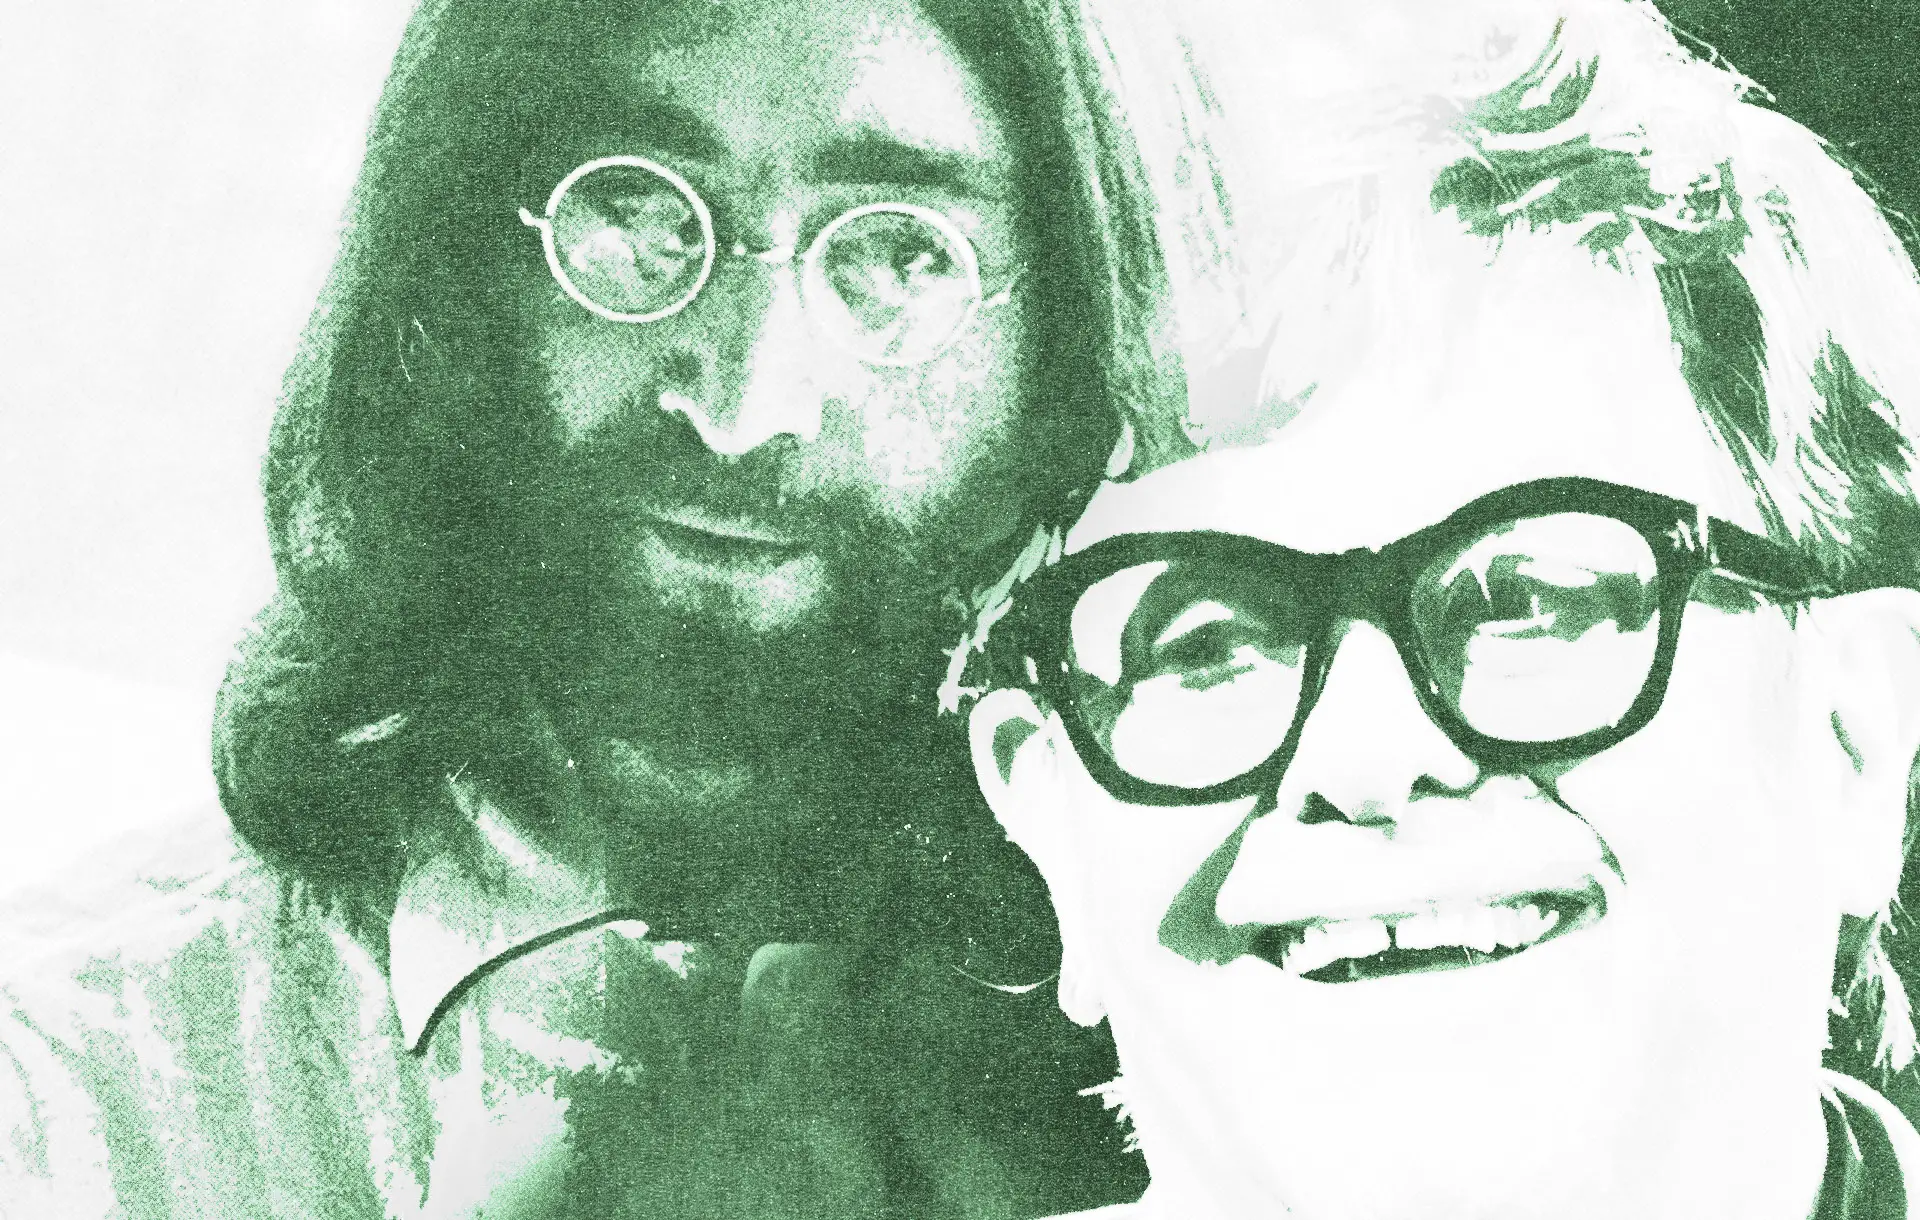 7 of the Most Iconic Glasses in Music History: A Look at Legendary Styles | Features | LIVING LIFE FEARLESS